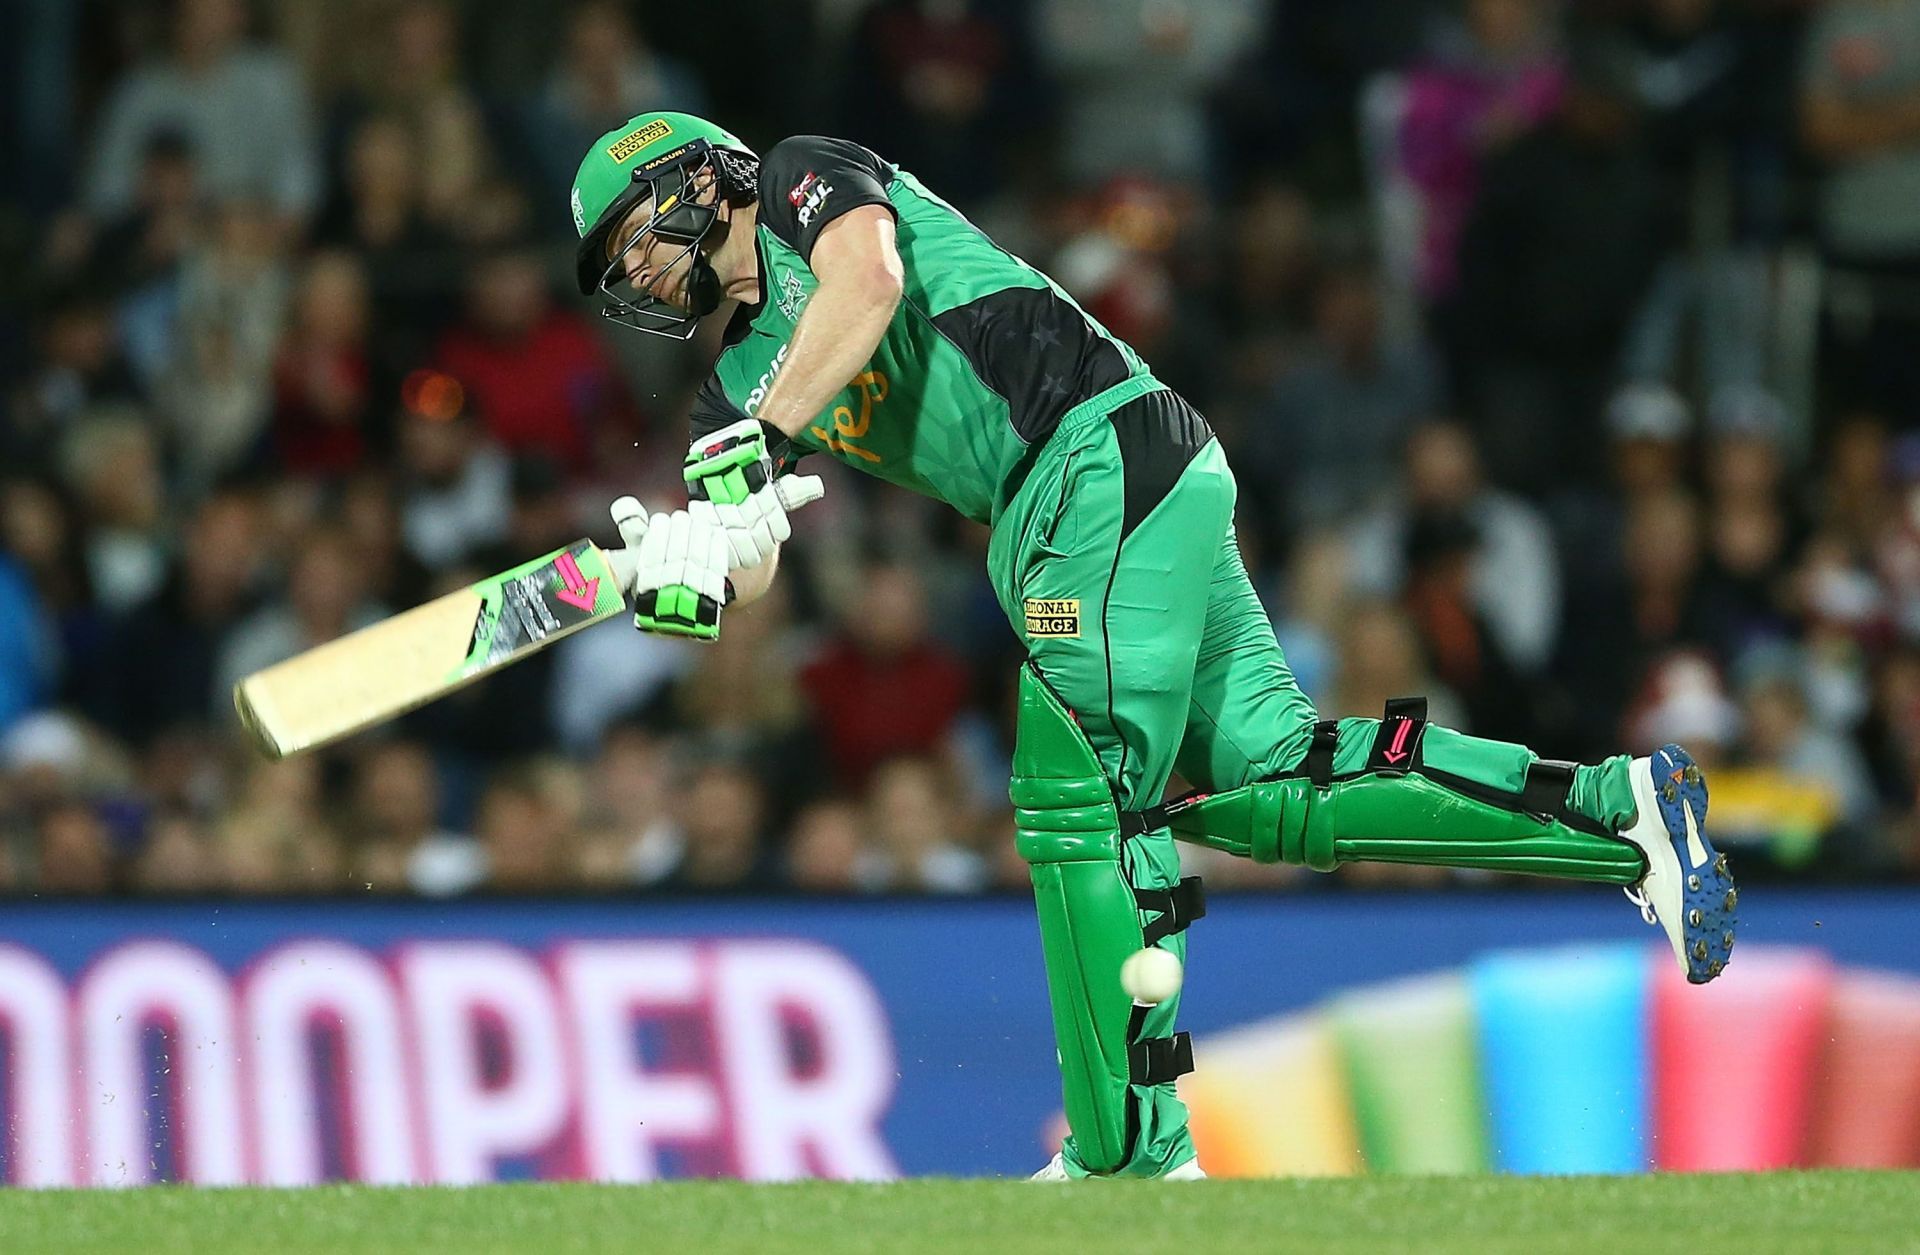 Luke Wright in the Big Bash League. Pic: Getty Images